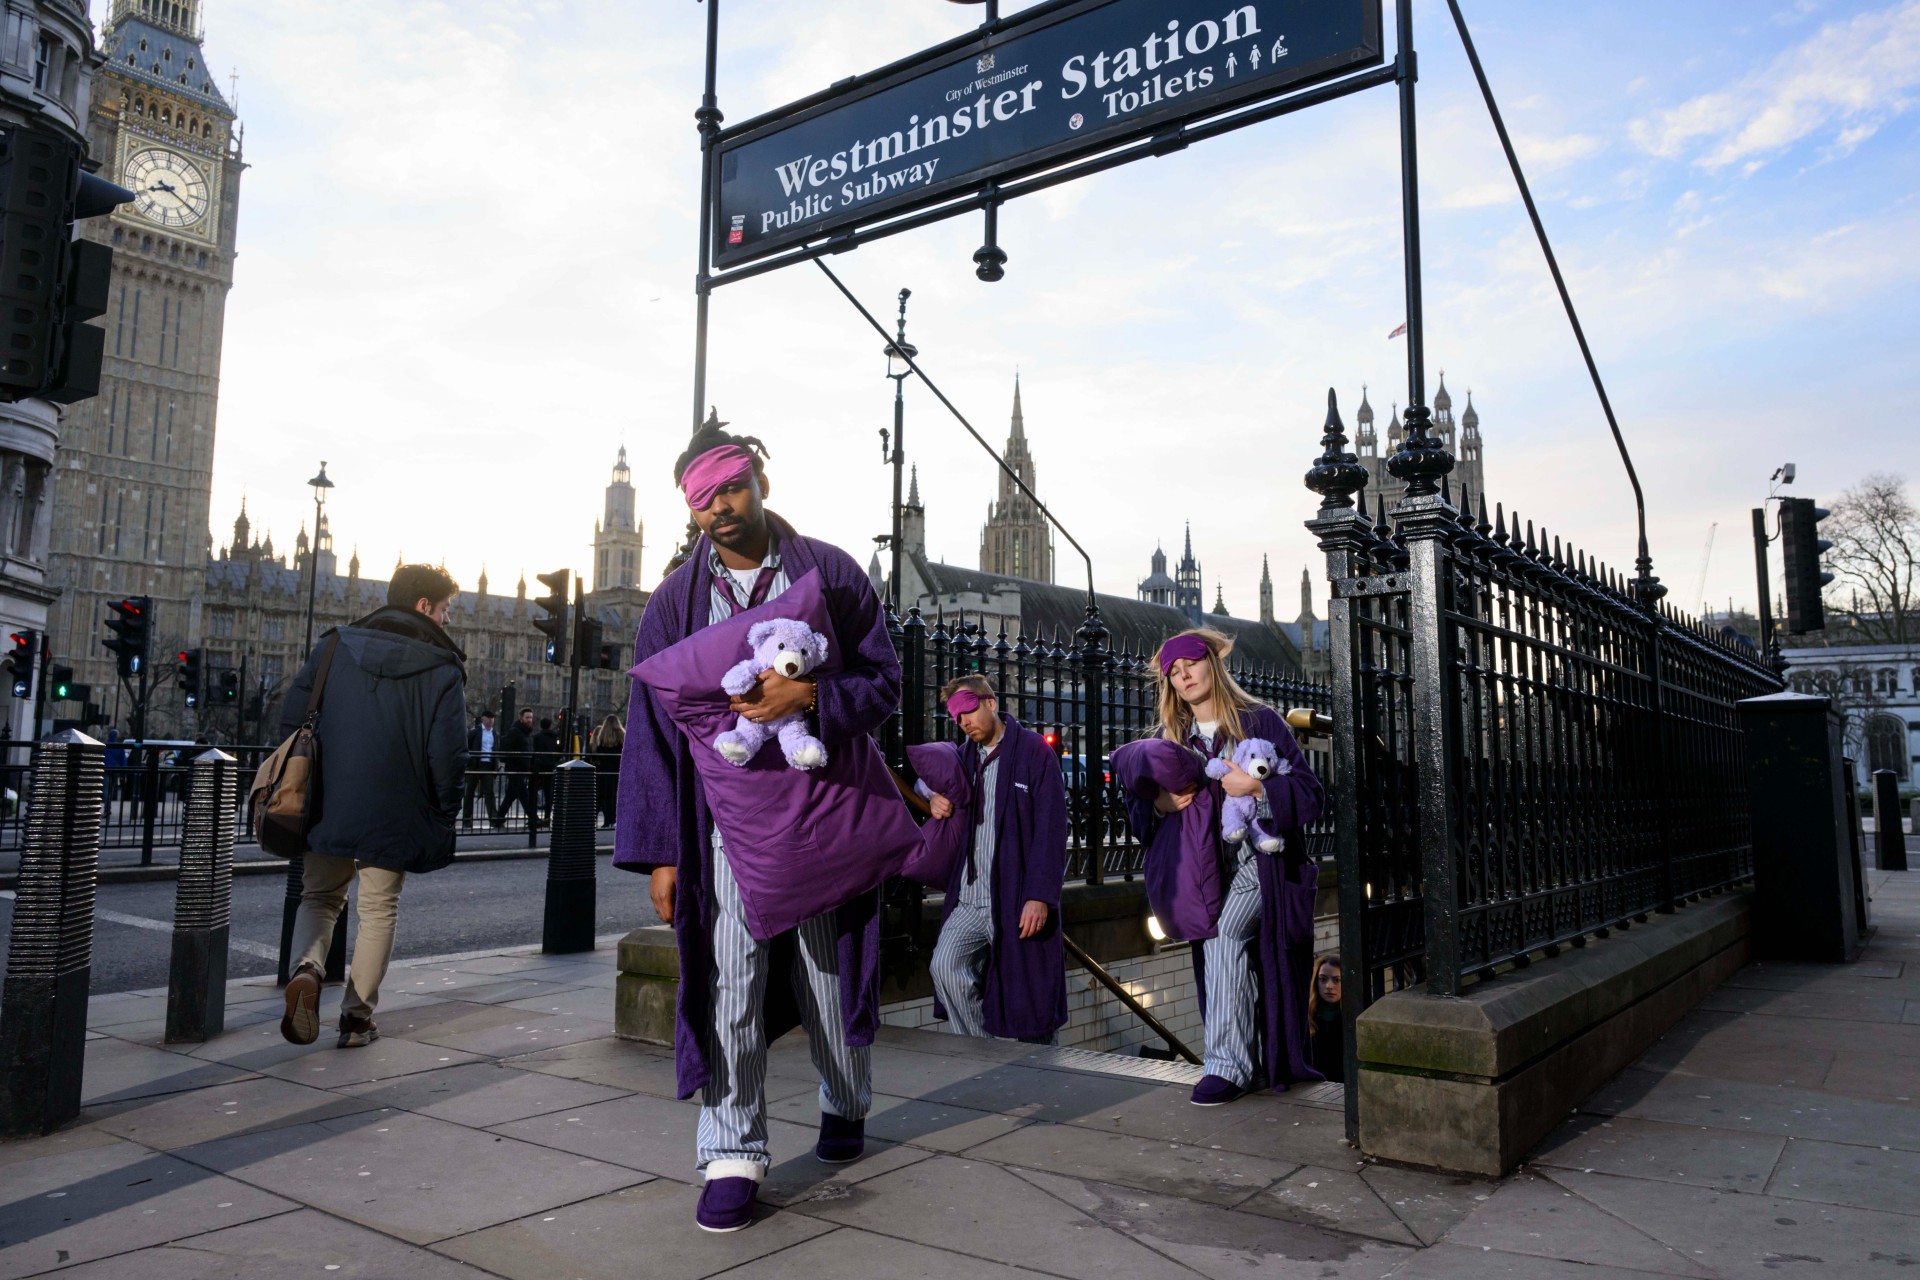 Three sleep deprived commuters emerging up the steps from Westminster Station wearing PJs, purple slippers, dressing gowns and sleep masks and carrying teddy bears